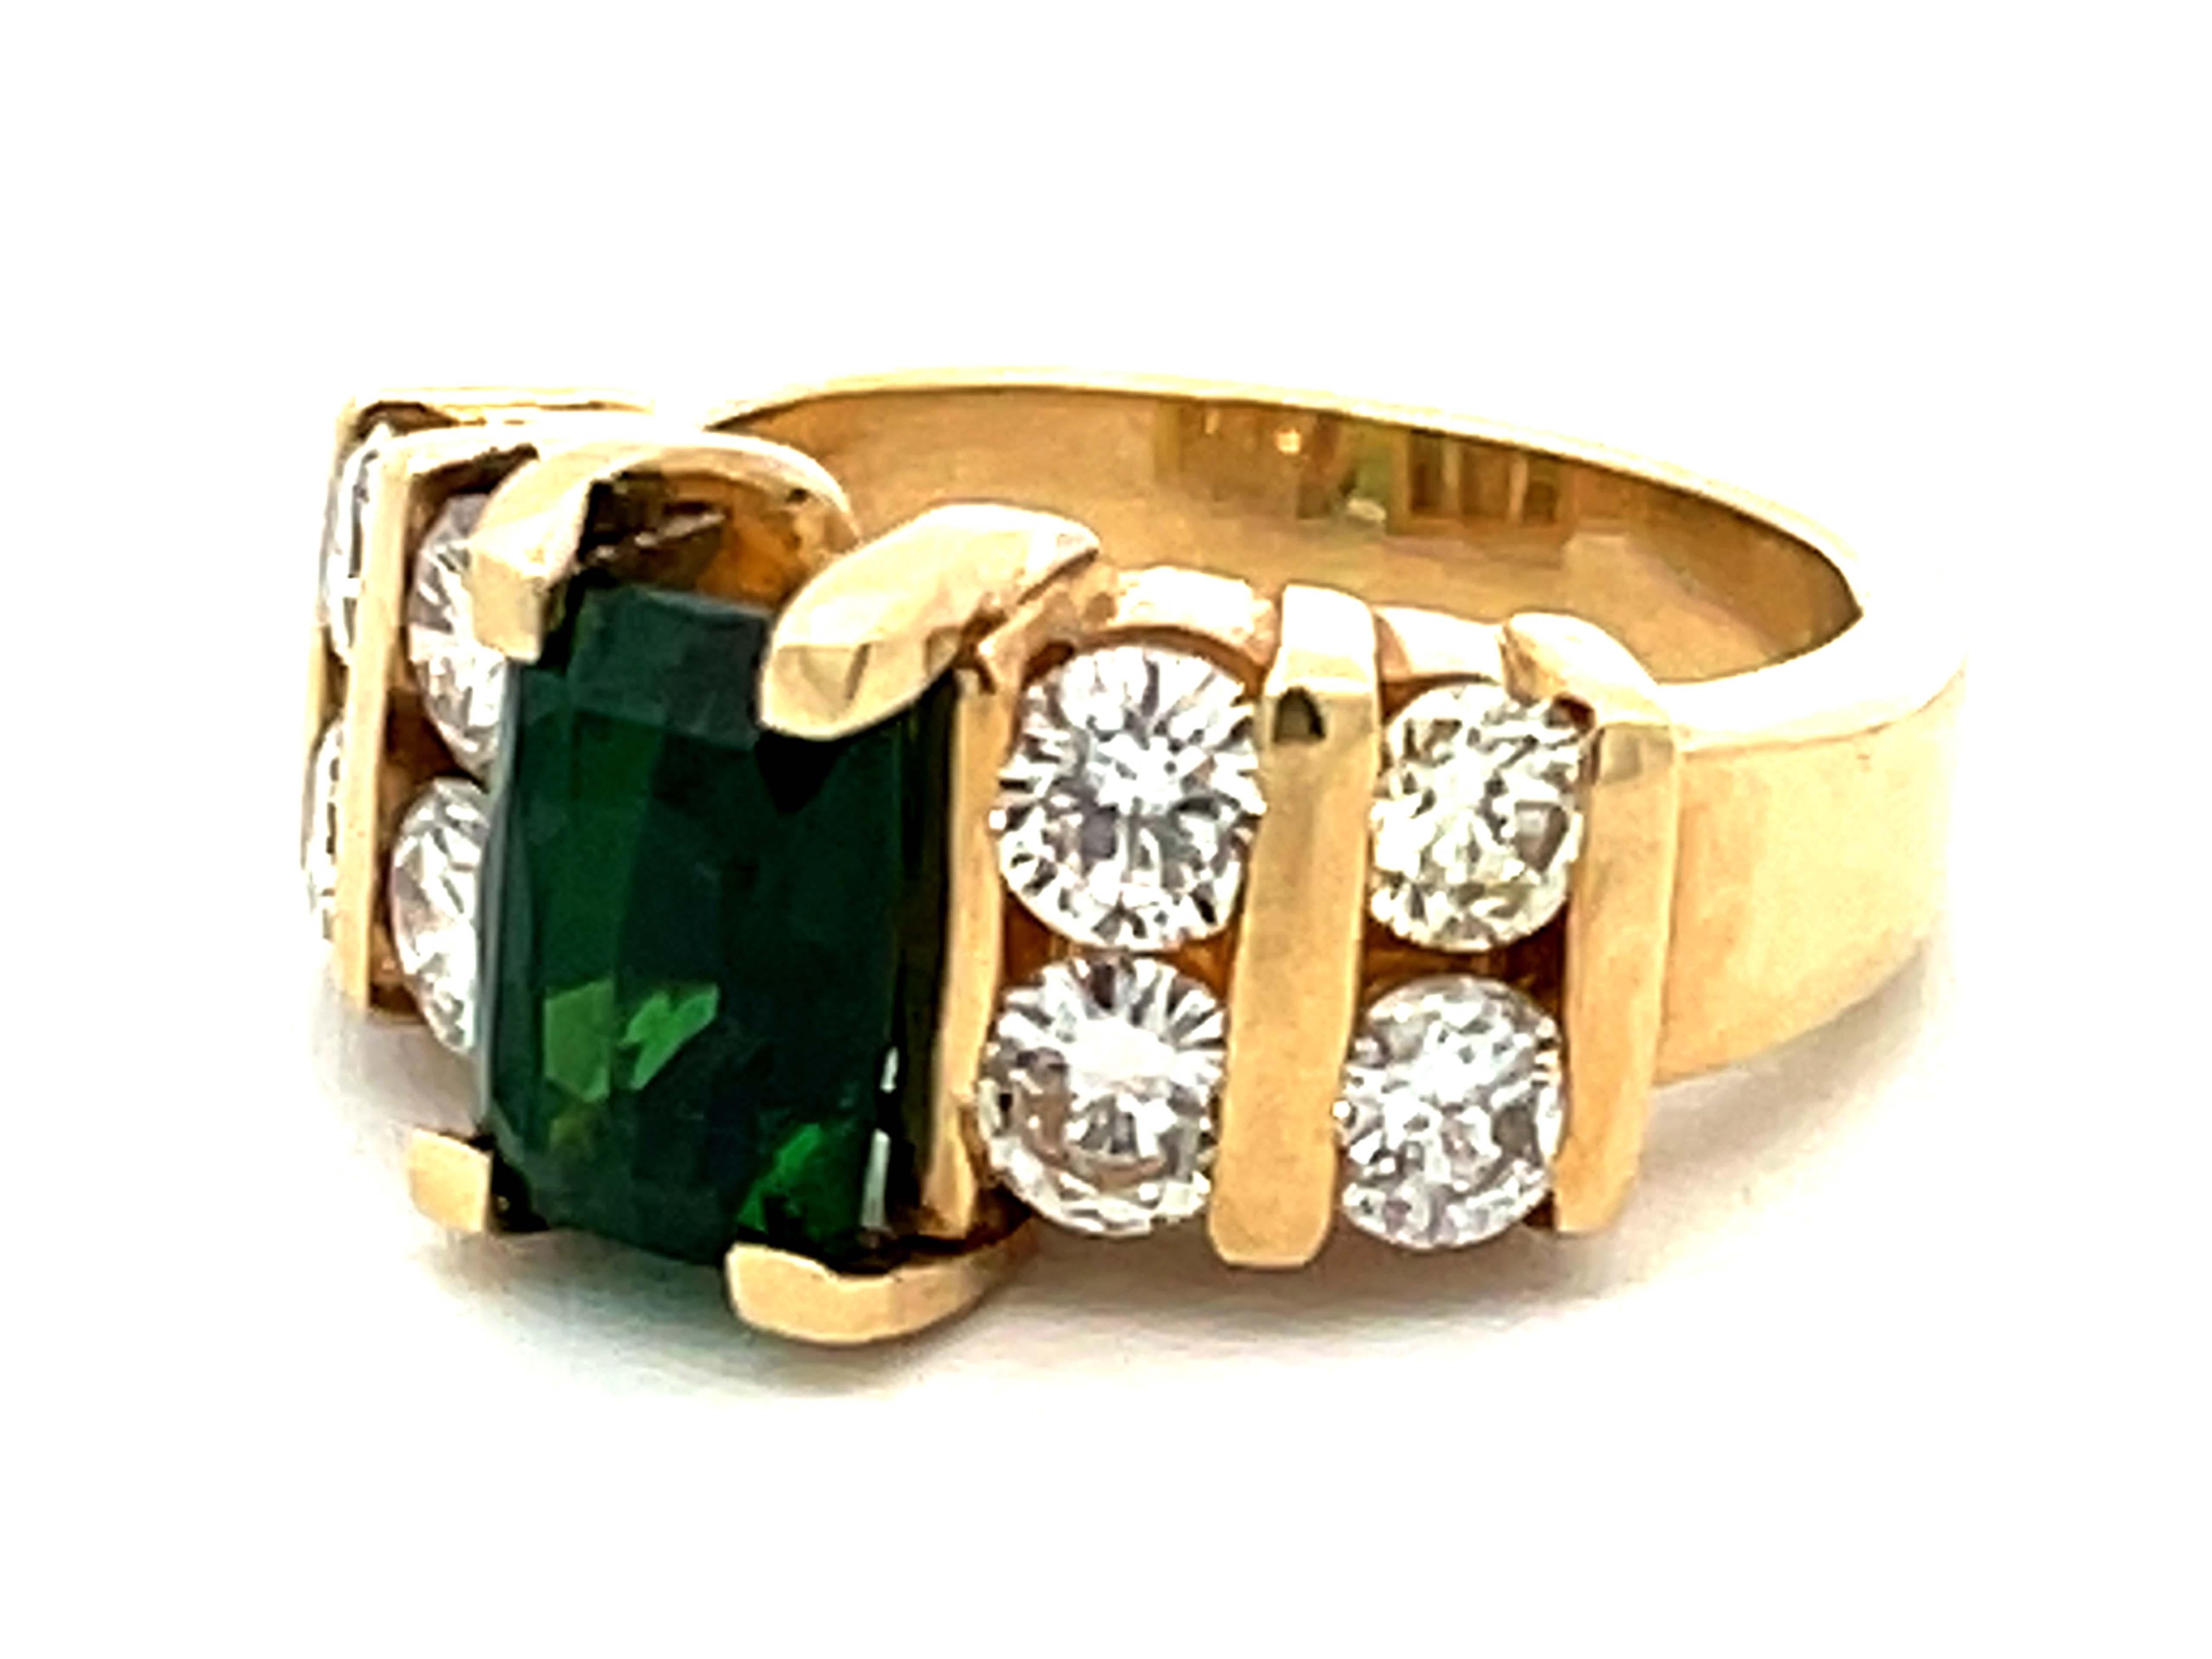 GIA Green Tsavorite Garnet and Diamond Ring in 14k Yellow Gold In Excellent Condition For Sale In Honolulu, HI